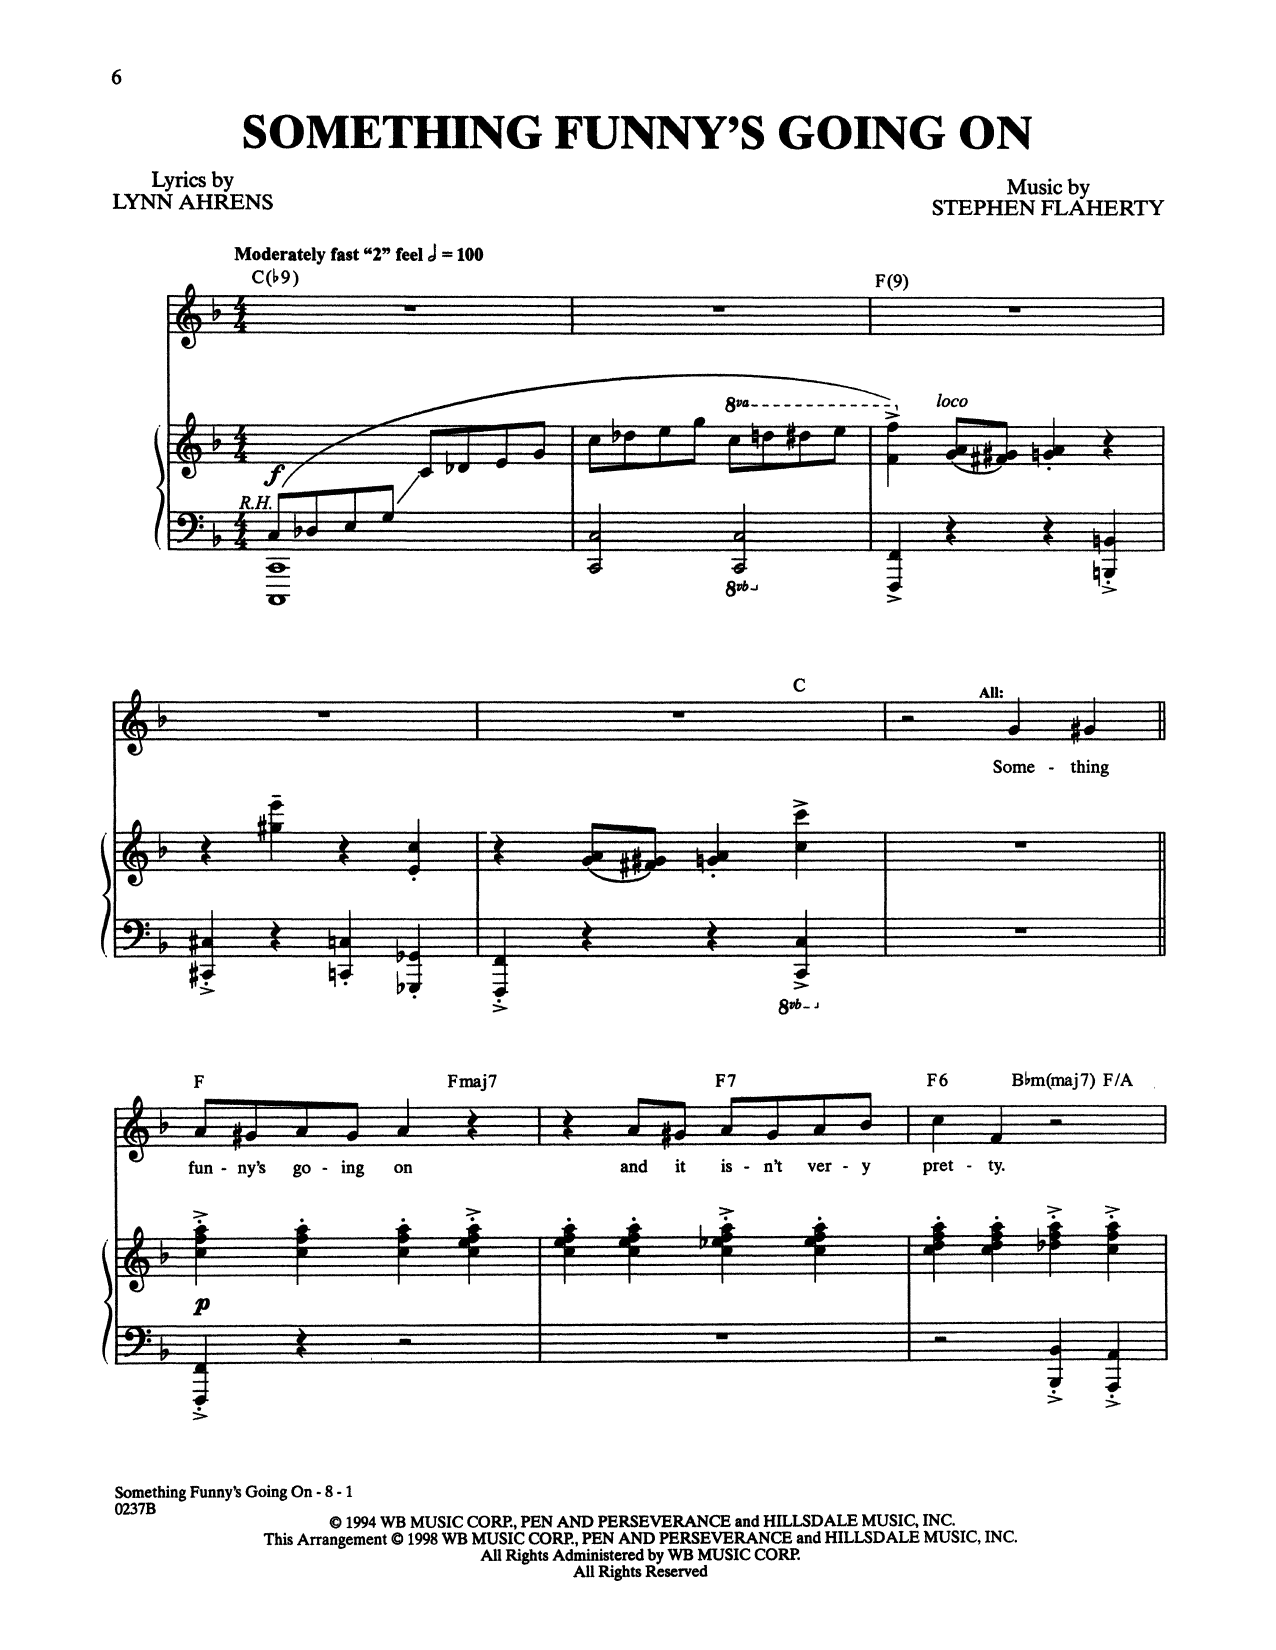 Download Stephen Flaherty and Lynn Ahrens Something Funny's Going On (from Lucky Sheet Music